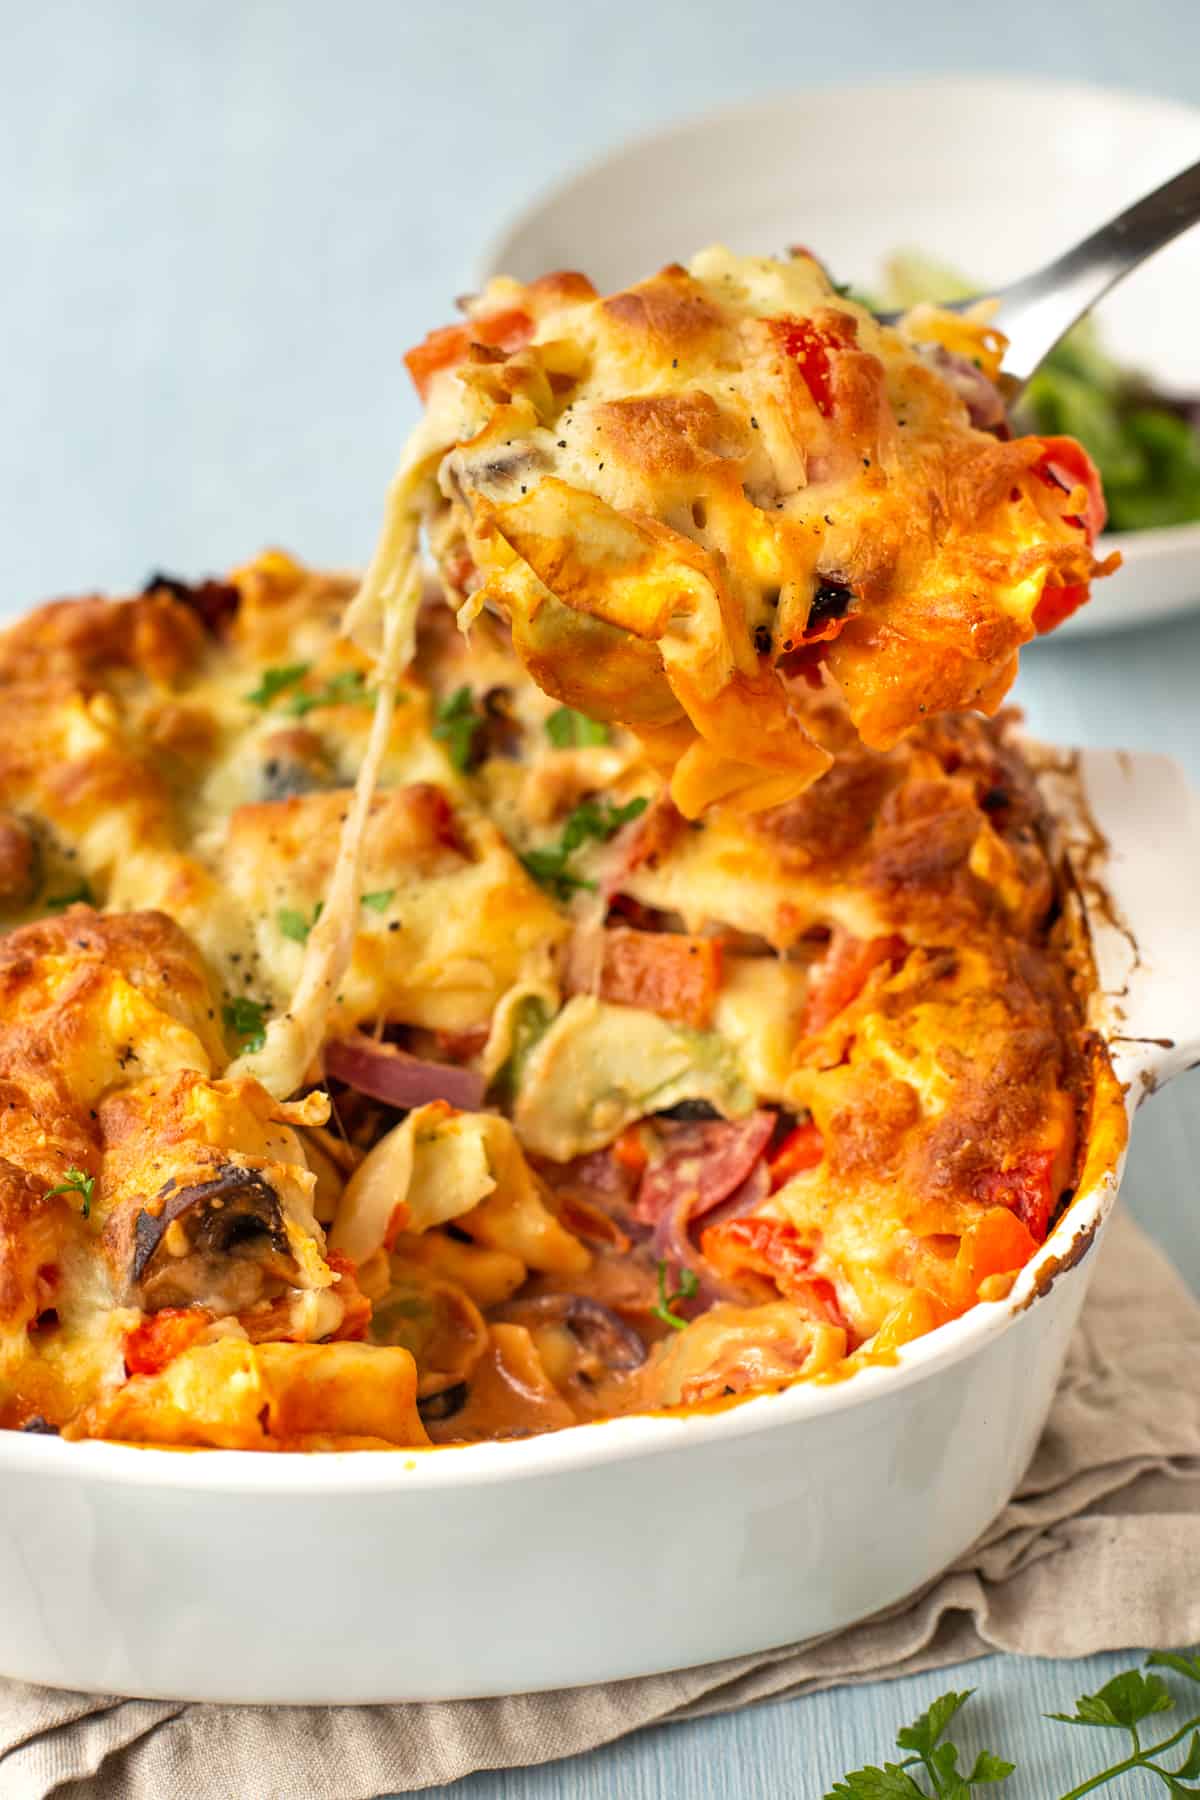 A gooey cheesy scoop of pasta bake being scooped from a dish.